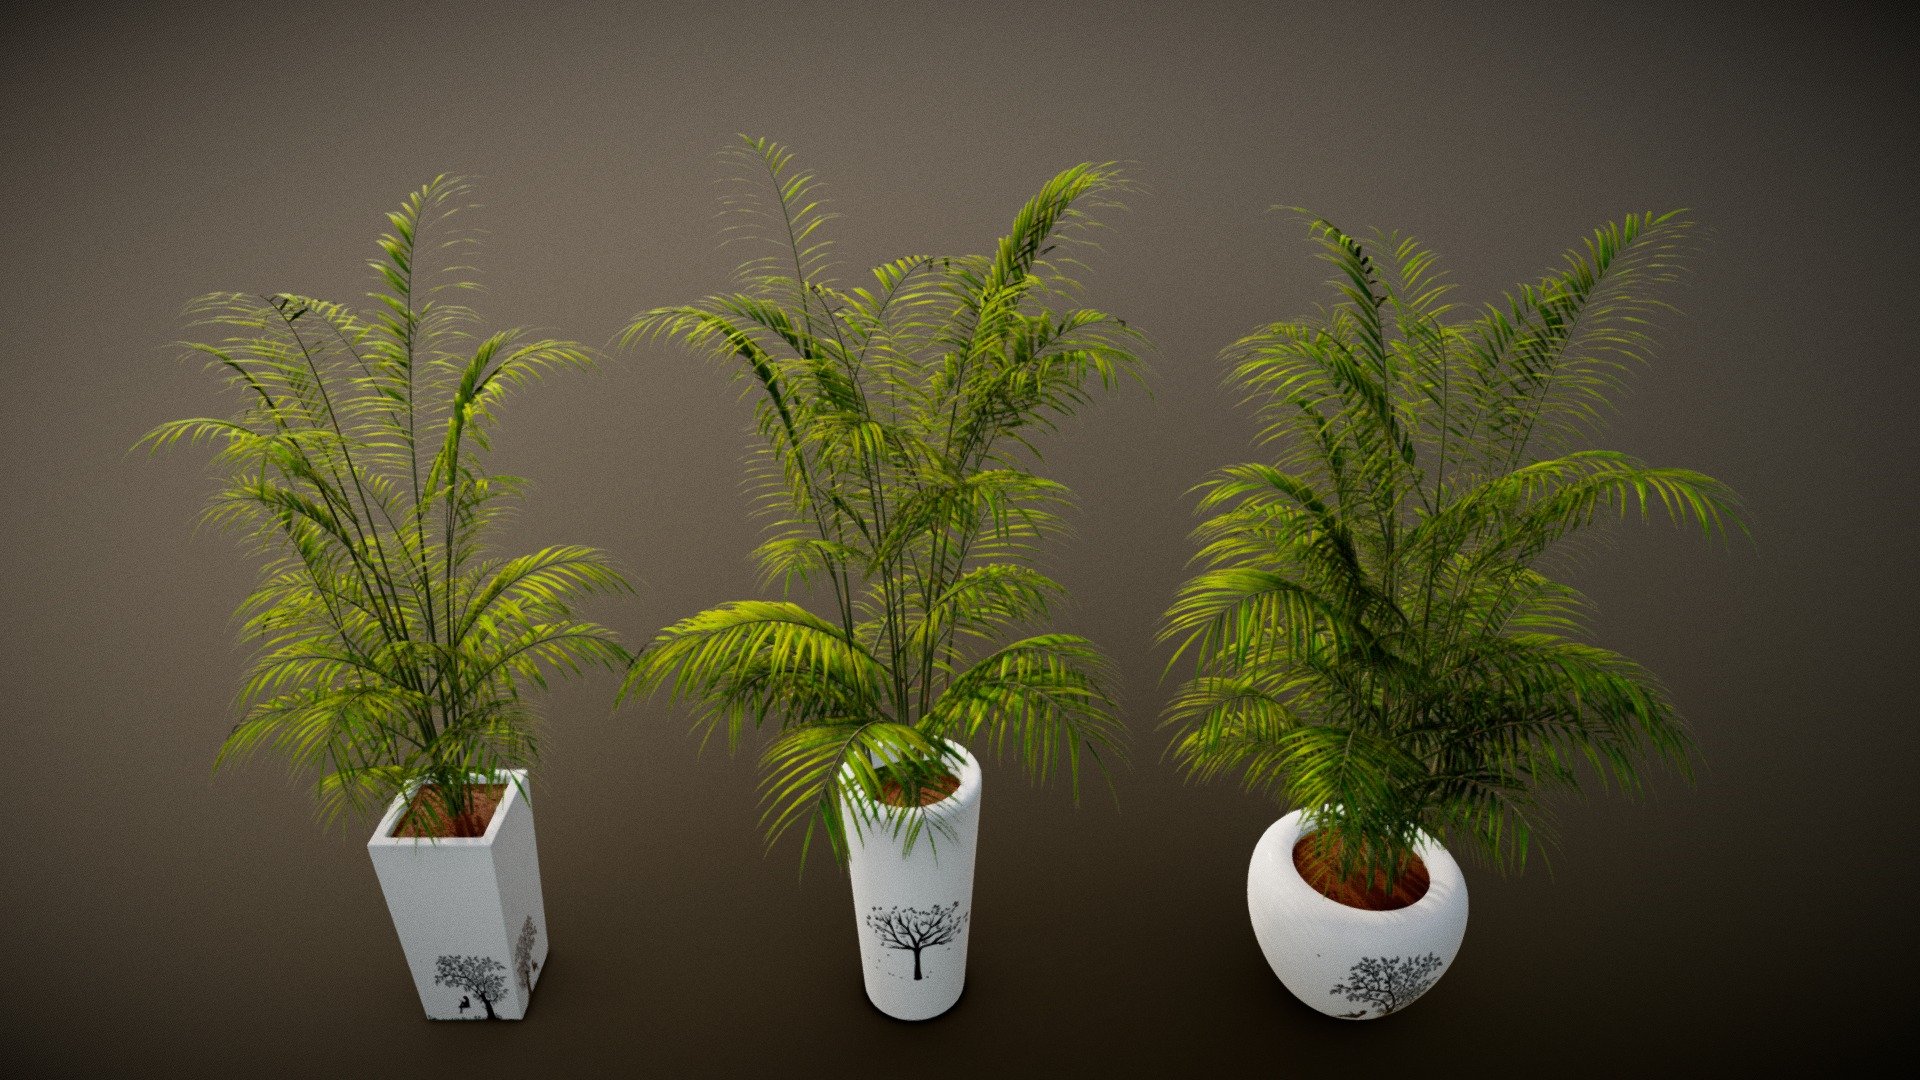 Potted Palm Plants with 4k Textures for Games and architecture visualization
File include 3 Material ID
1.Palm Leaves
2.Palm Stem
3.Pot

Textures are Packed into Blend File so you need to unpack the Blend file to get seperate folder with Textures
Thank You!
Extra 3 Pots are also included in the additional files - Potted Palm Plants - Buy Royalty Free 3D model by Nicholas-3D (@Nicholas01) 3d model